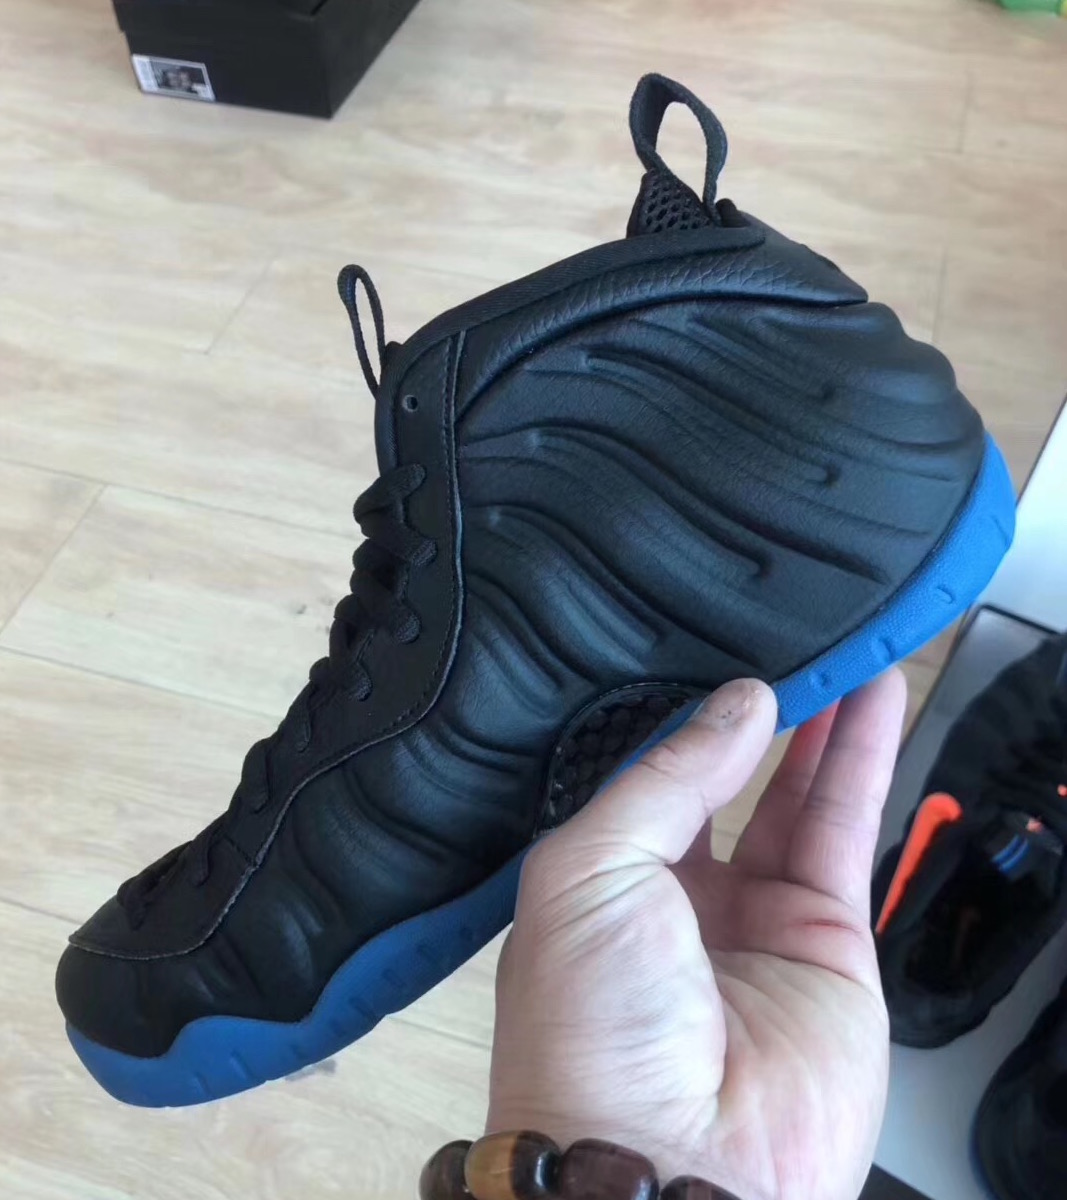 black and blue foamposites 2019